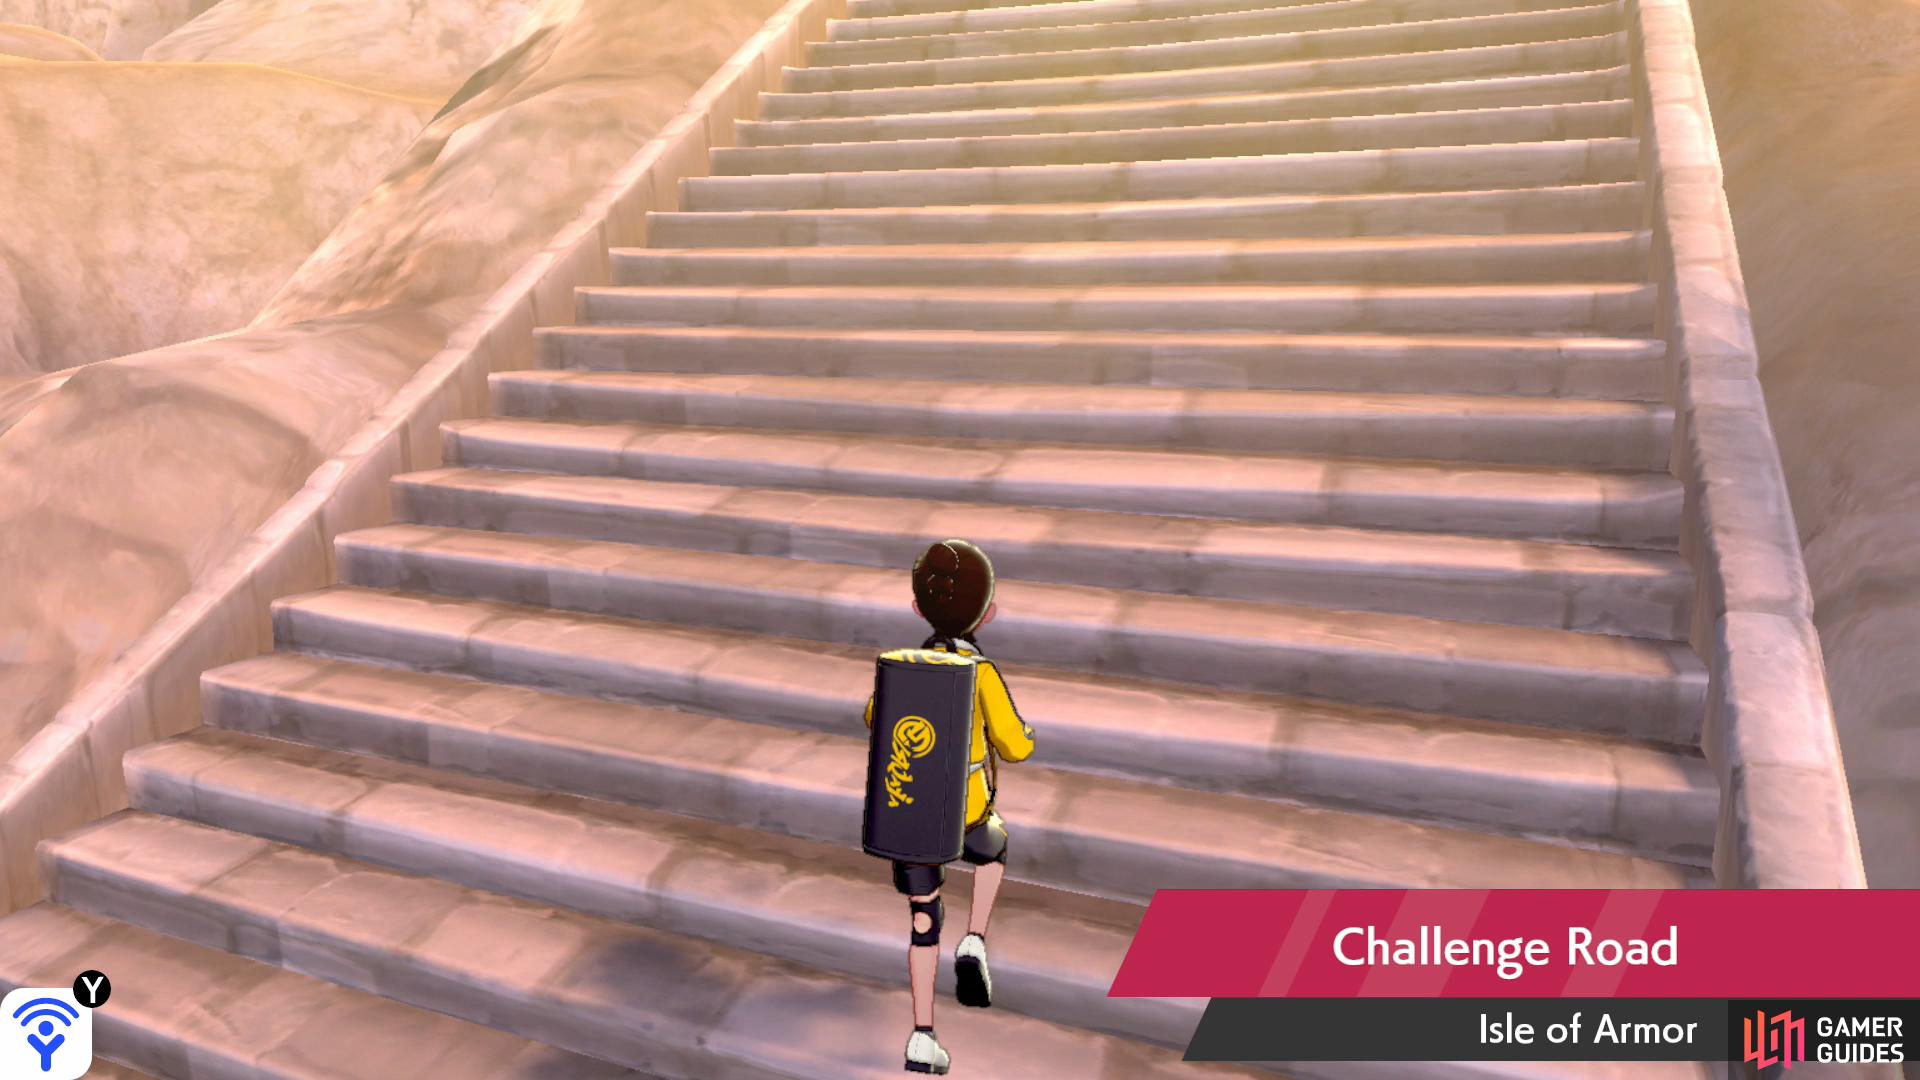 Nothing says “challenge”  than a long flight of stairs.